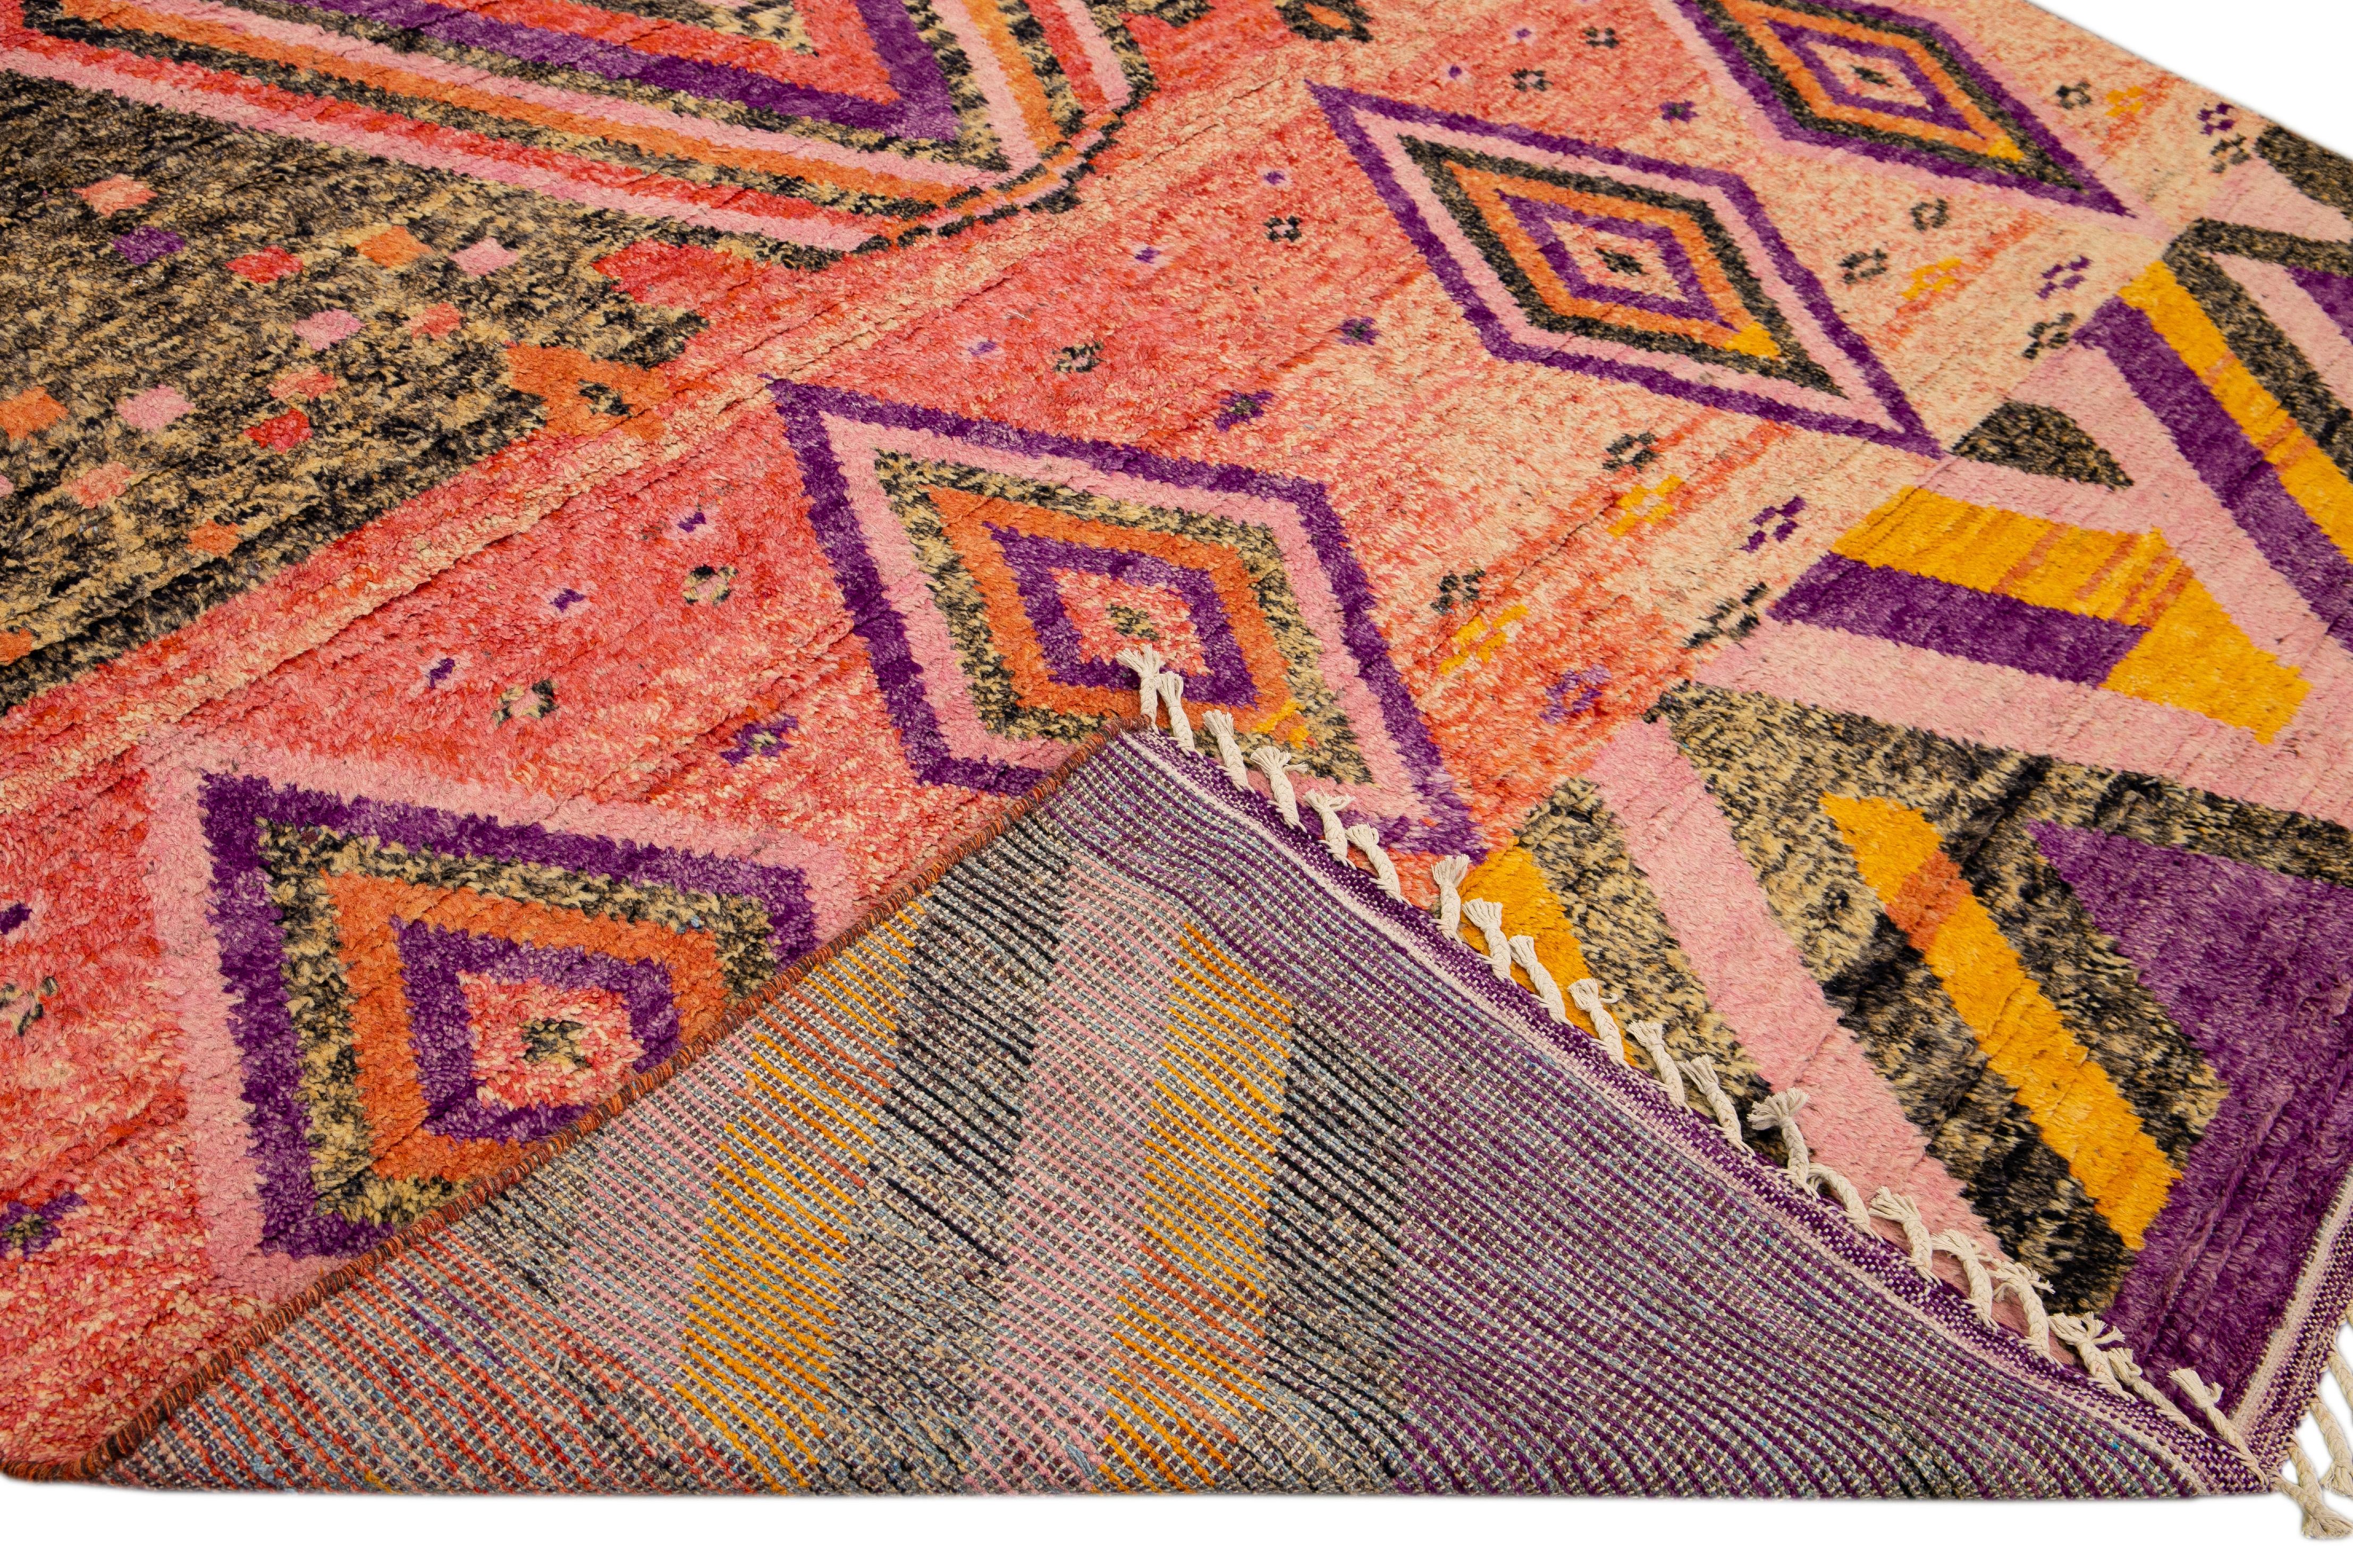 Beautiful Moroccan style handmade wool rug with peach and purple field. This Modern rug has orange, gray, and yellow accents and beige fringes featuring a gorgeous all-over boho geometric design.

This rug measures: 9'4